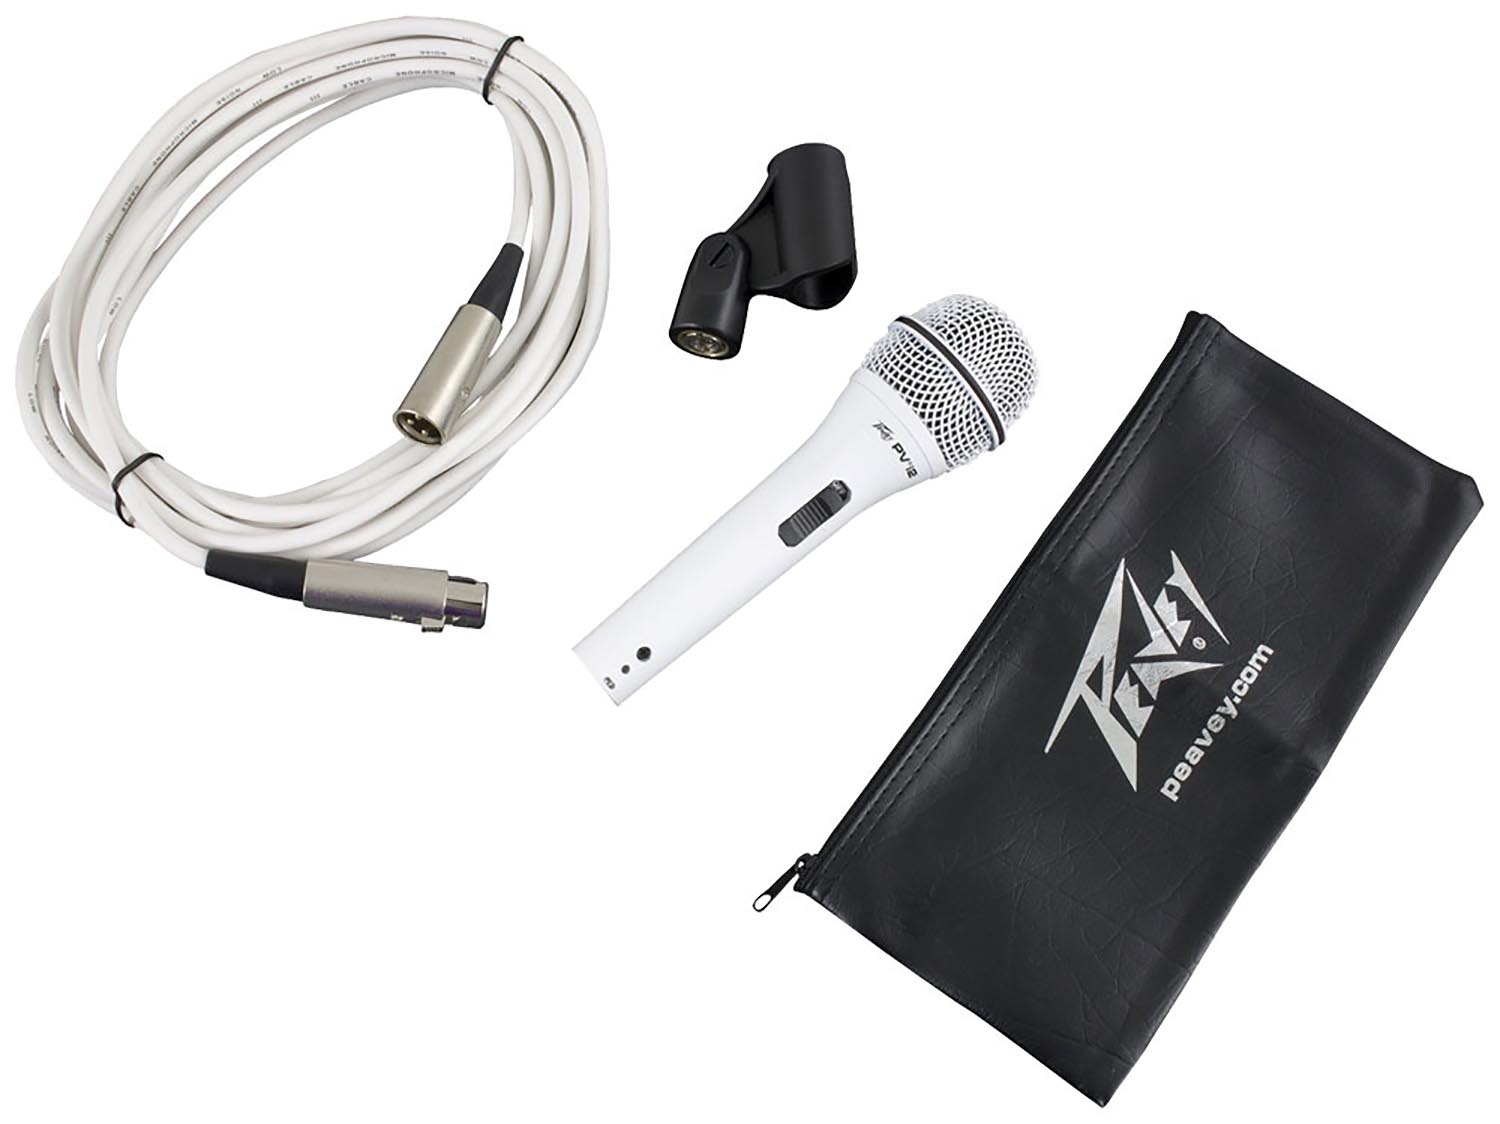 Open Box: Peavey PVI 2W Cardioid Unidirectional Dynamic Vocal Microphone with XLR Cable - White - Hollywood DJ